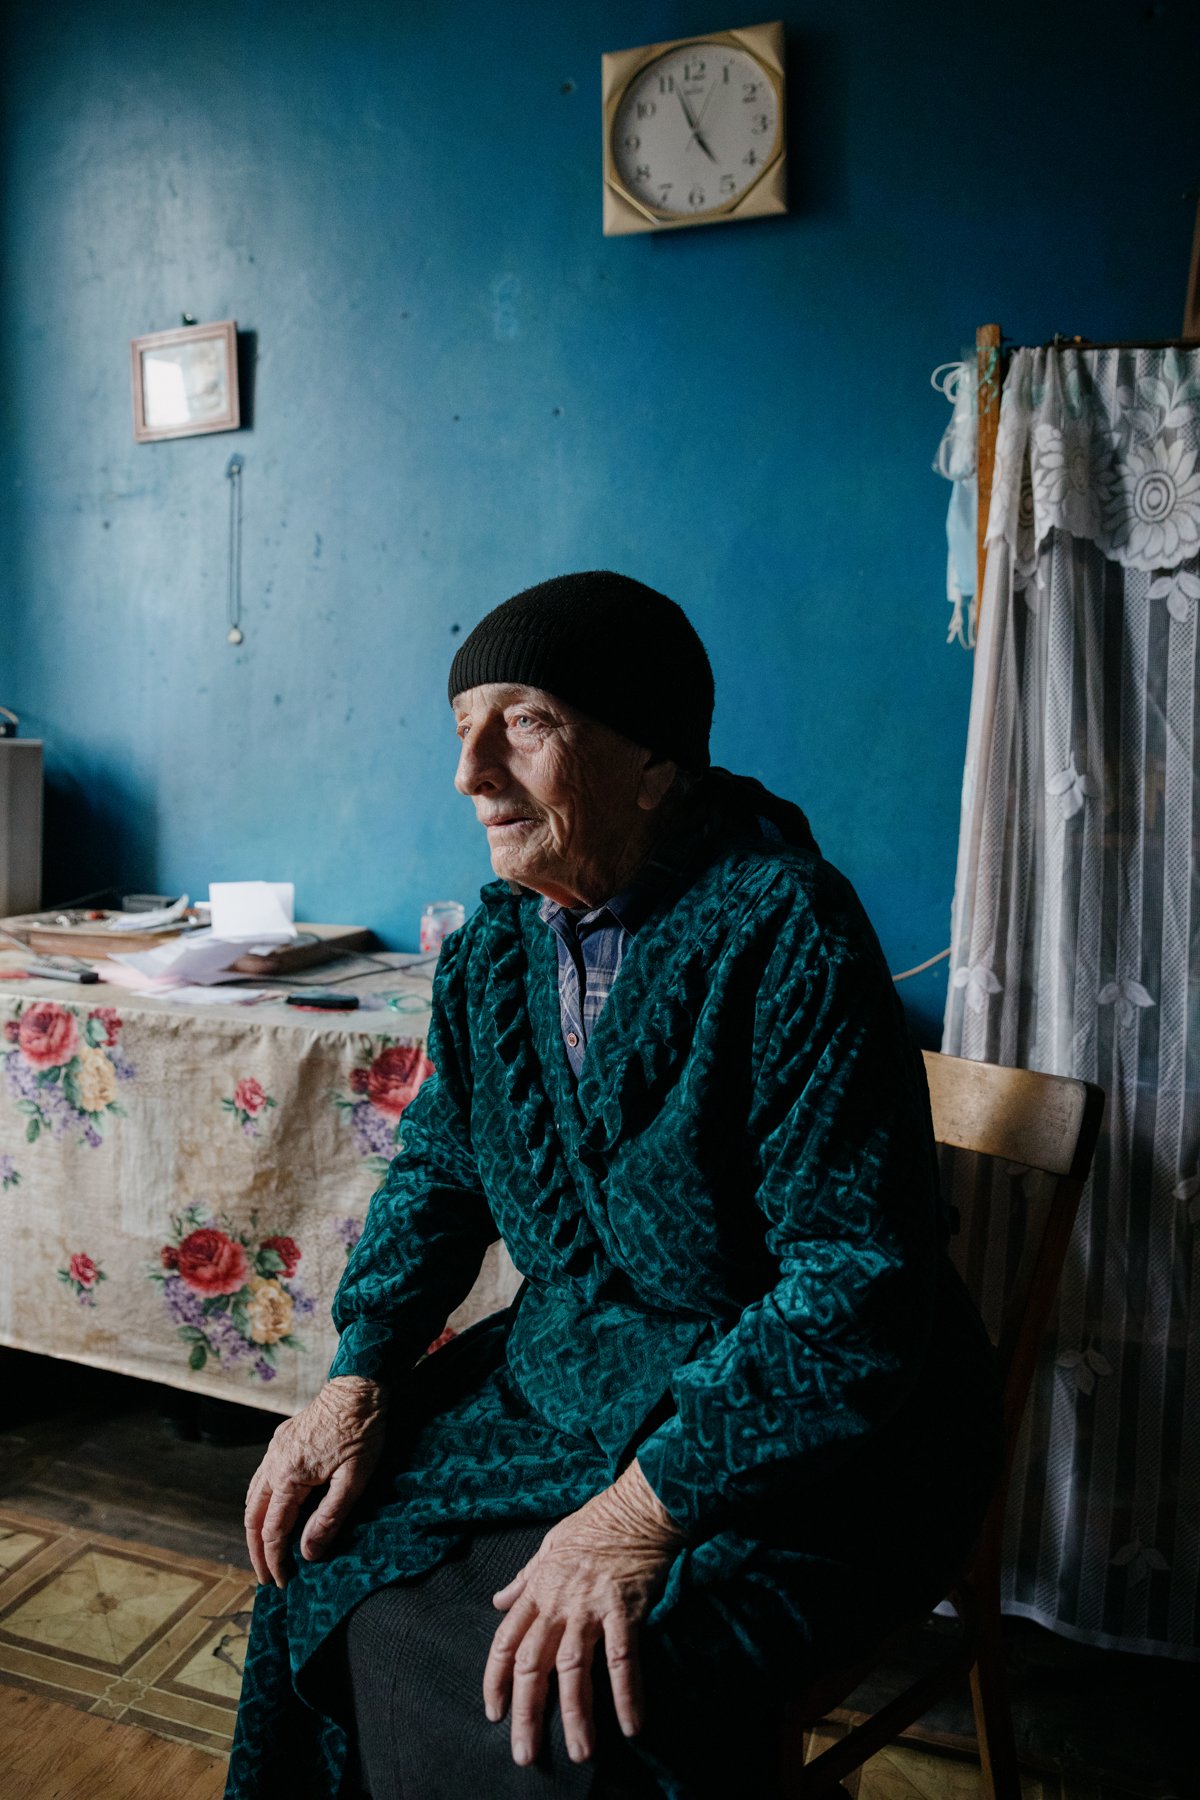  Zaira Jigania, an IDP from Abkhazia, lives alone in a room in the same building as Zugdidi council's cleaning department. She has spent years fighting to get her own apartment but hasn't succeeded yet. 